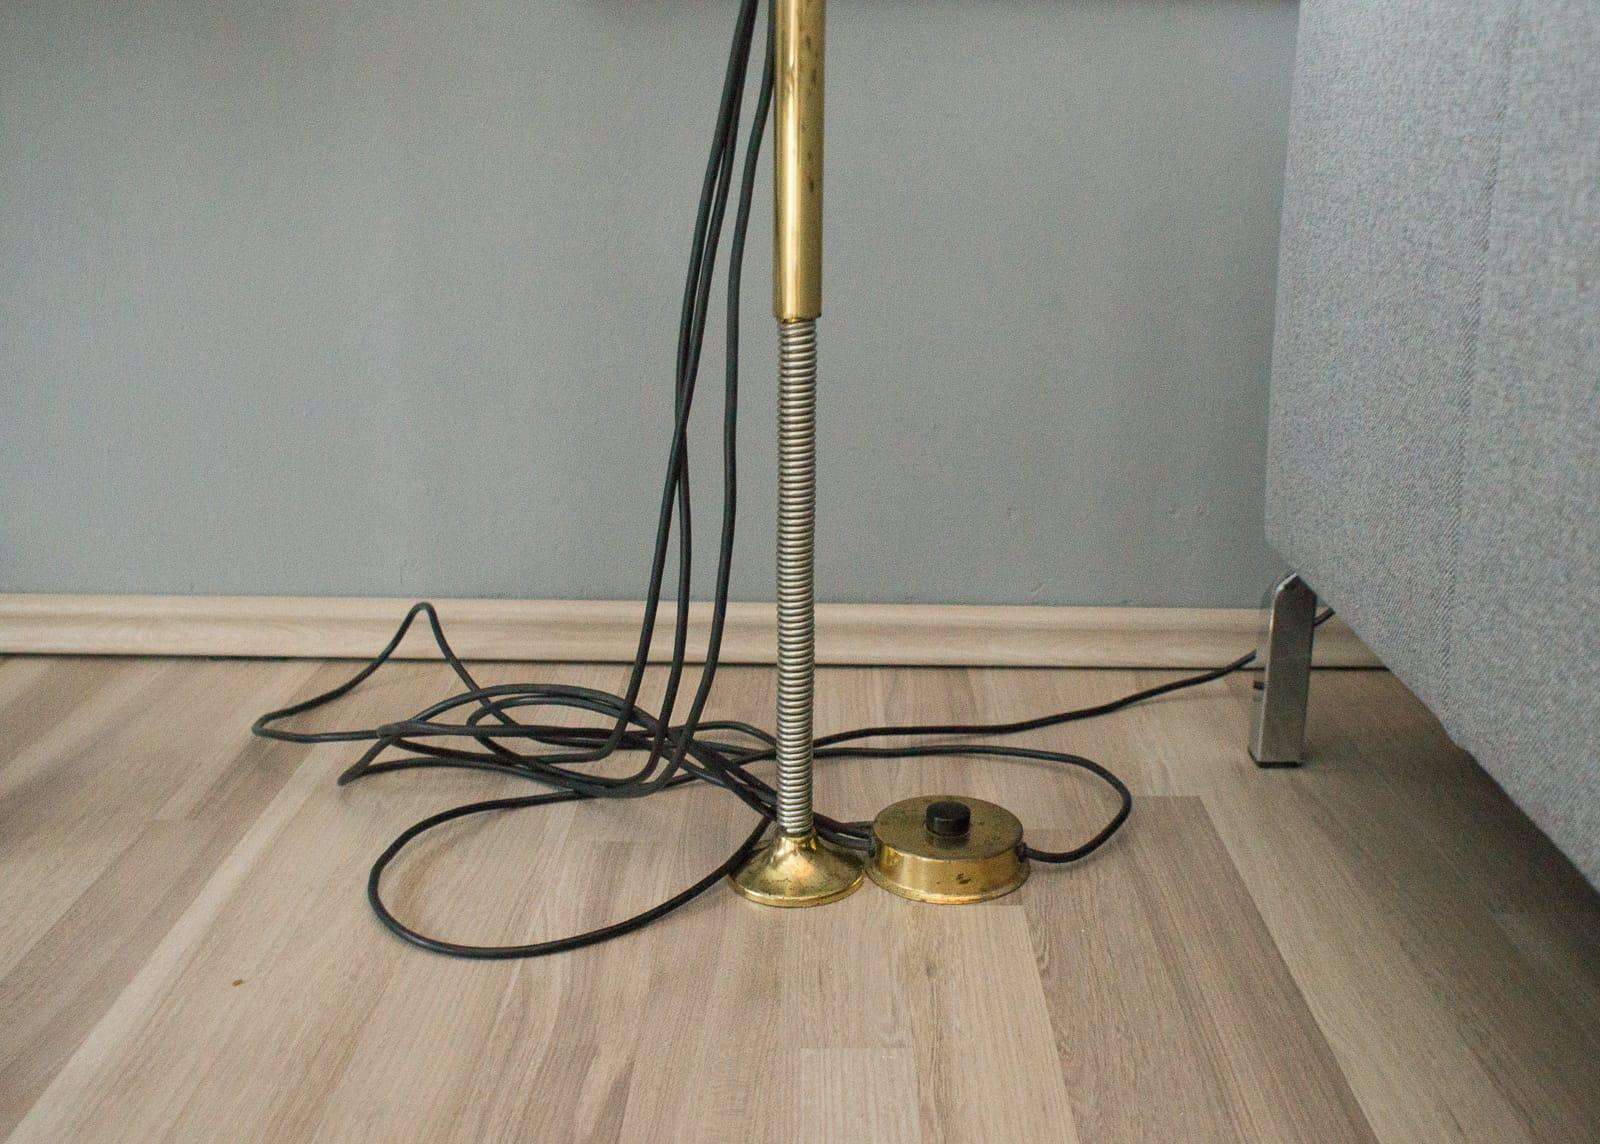 Extremly Rare Brass Tension Lamp from Florian Schulz, Model S 100 12